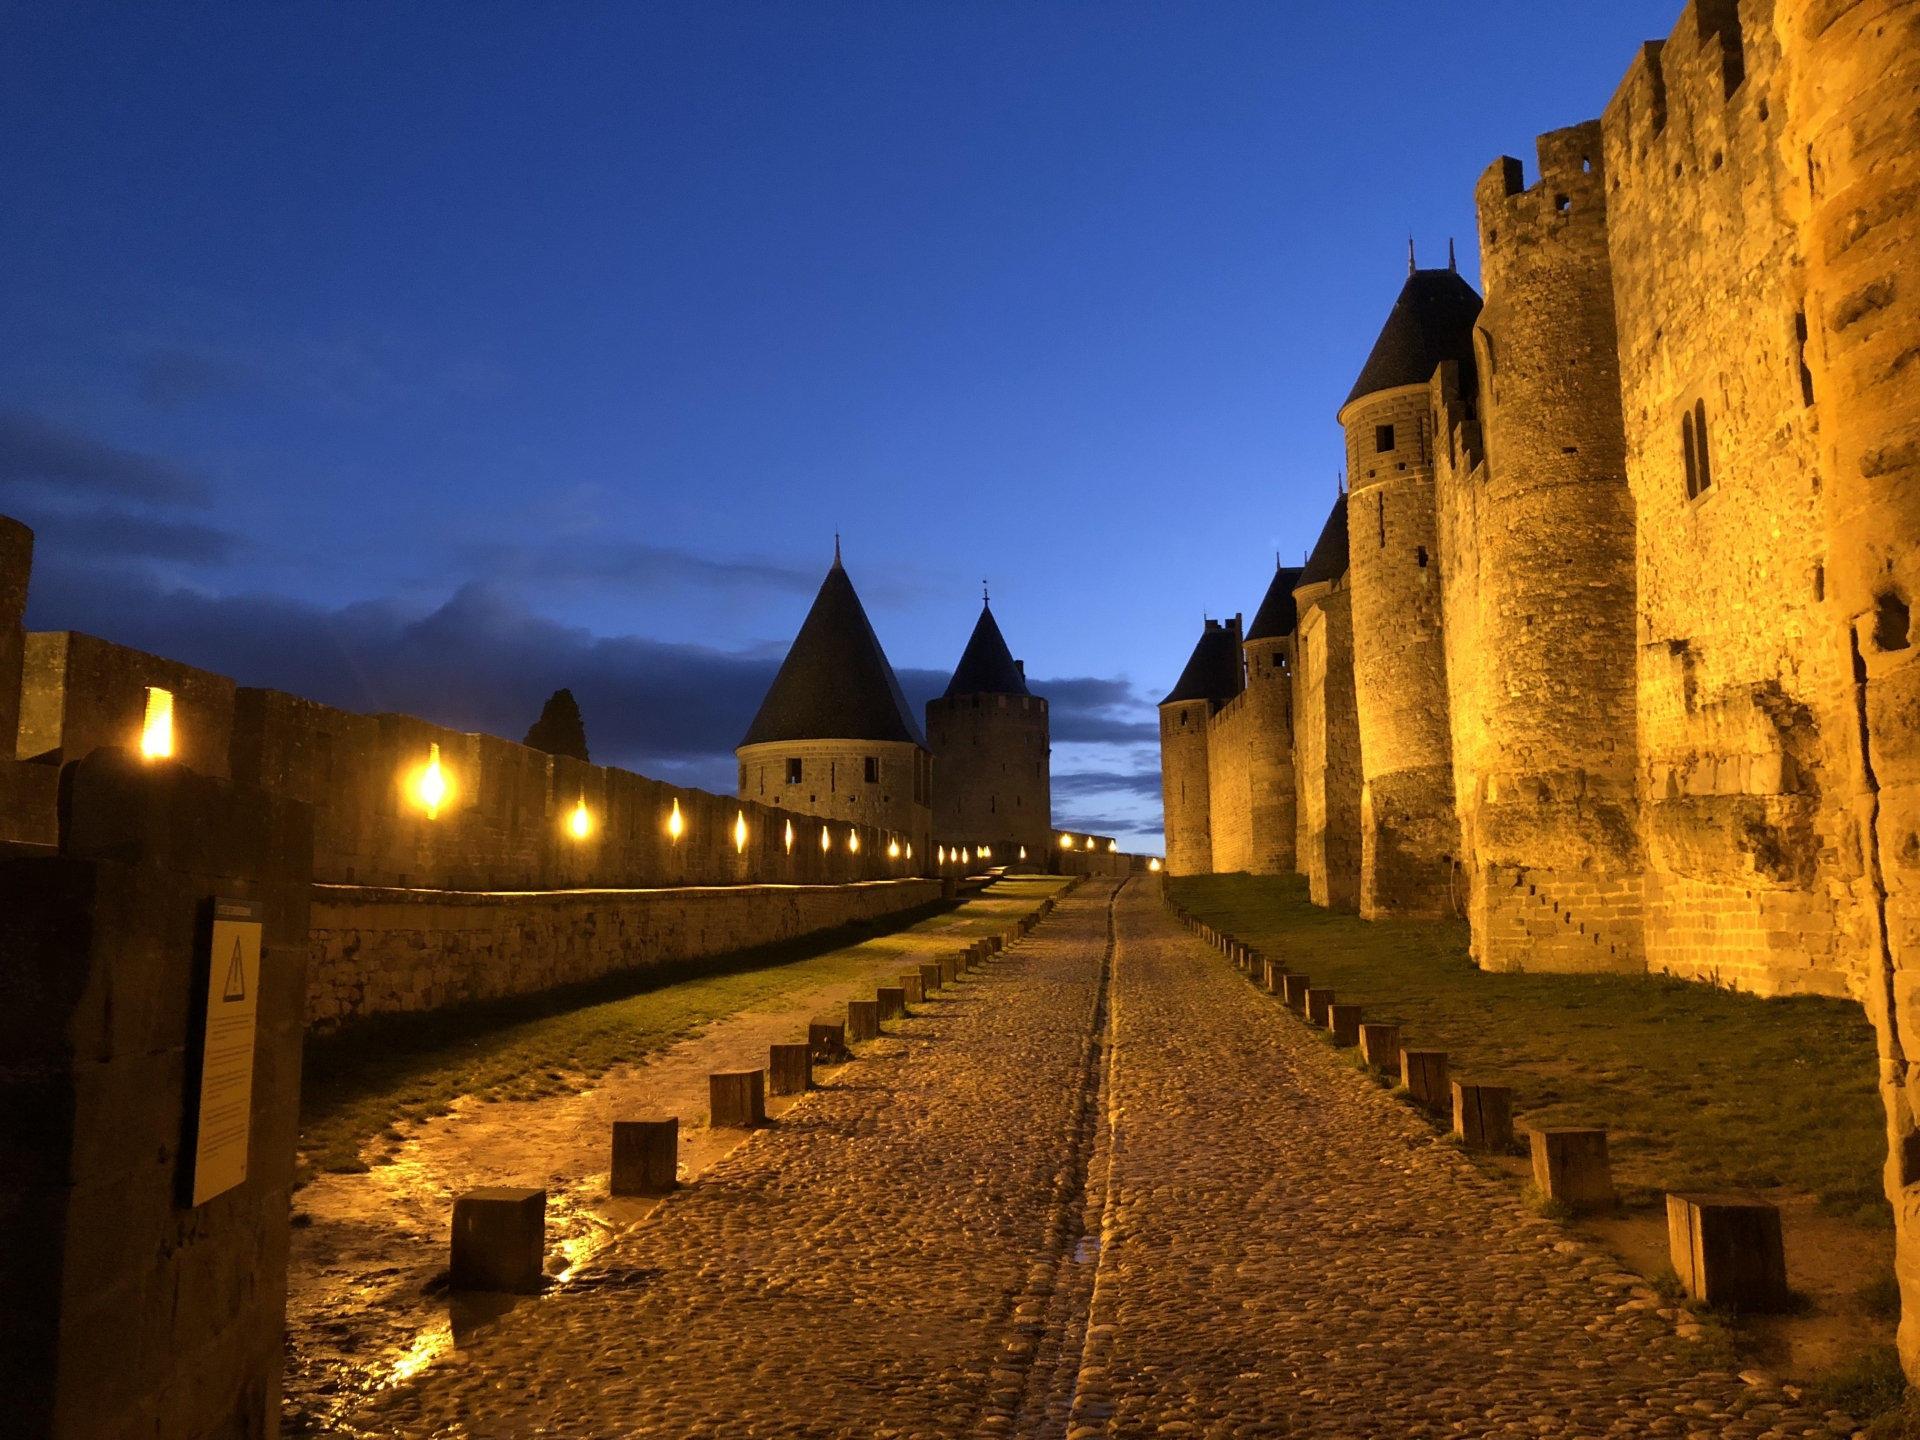 The walls of the Carcassonne fortress lighted up in the evening